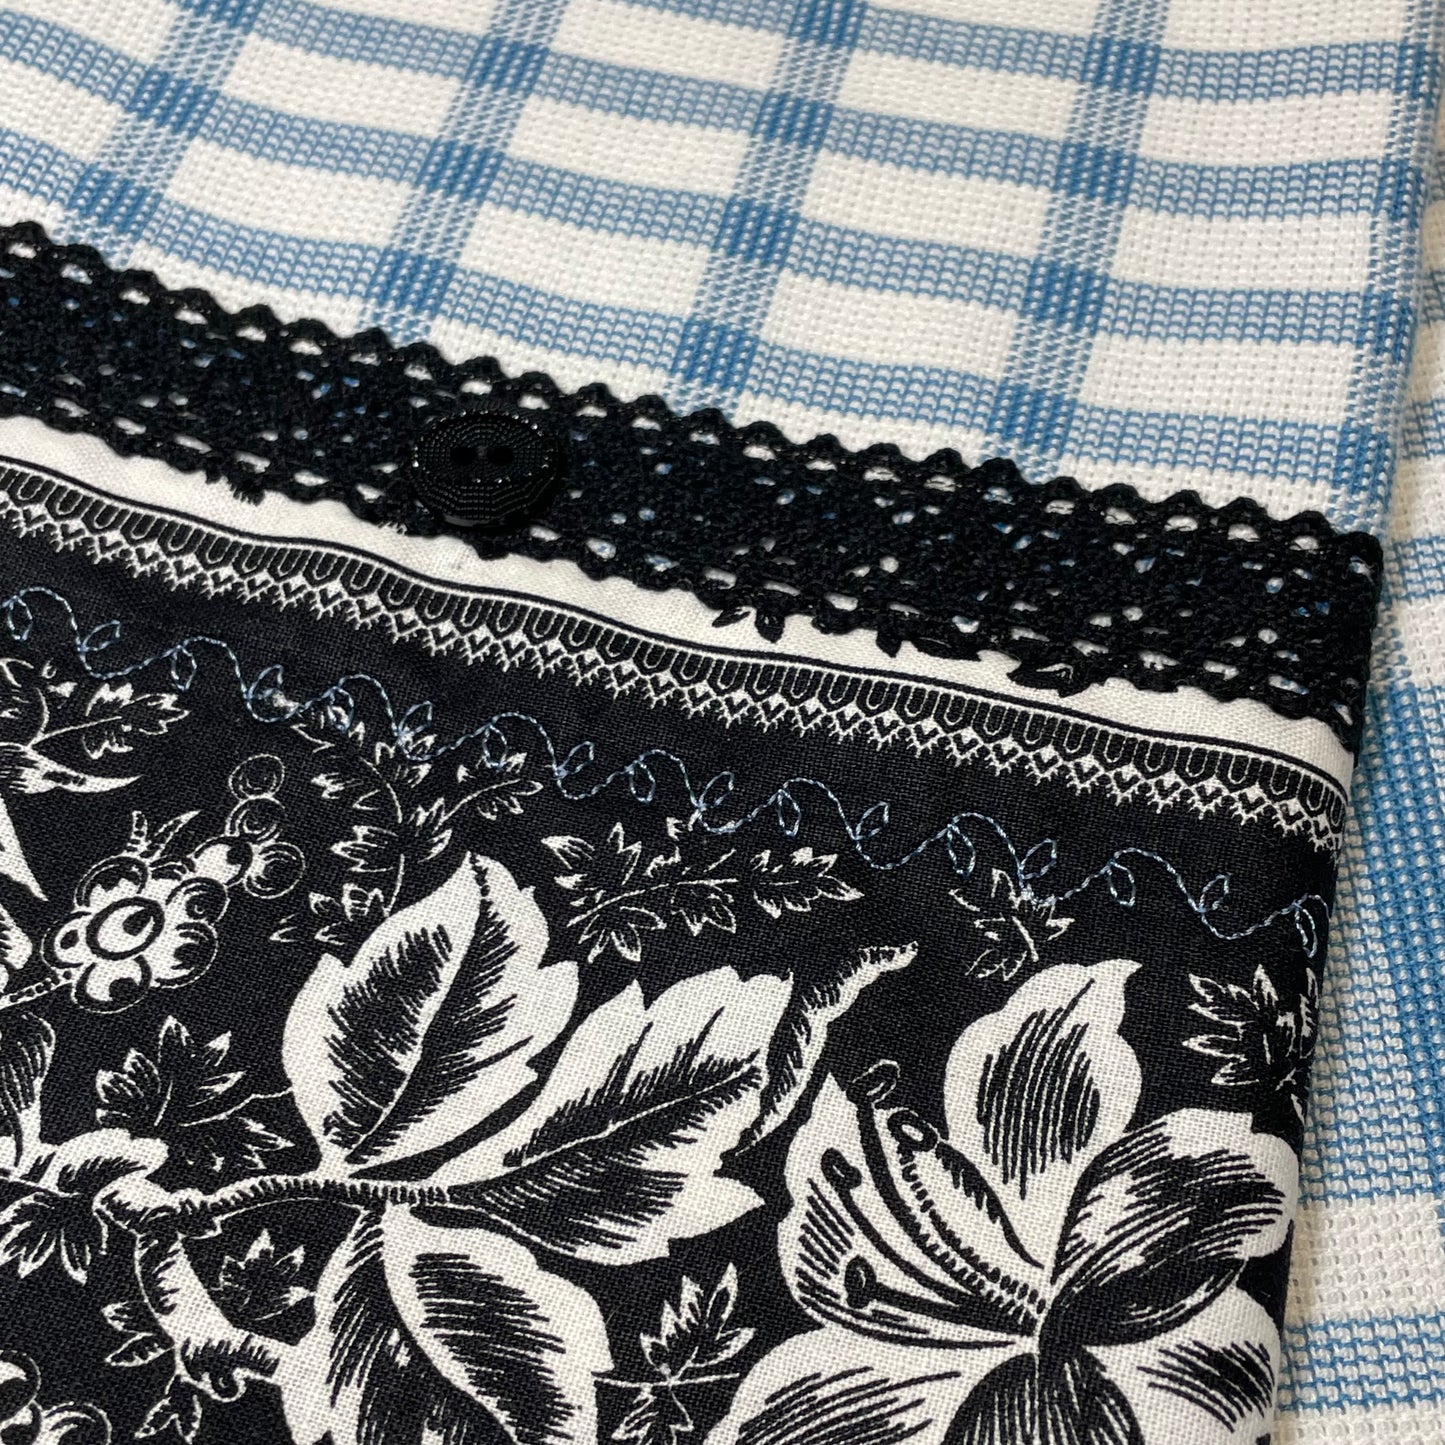 Blue and Black decorative tea towel handcrafted in Canada. Blue Embroidery Stitching, Black Cotton Lace Trim and Black button. Purchase your favorite or learn to make your own with tutorials on the Home Stitchery Decor YouTube Channel.